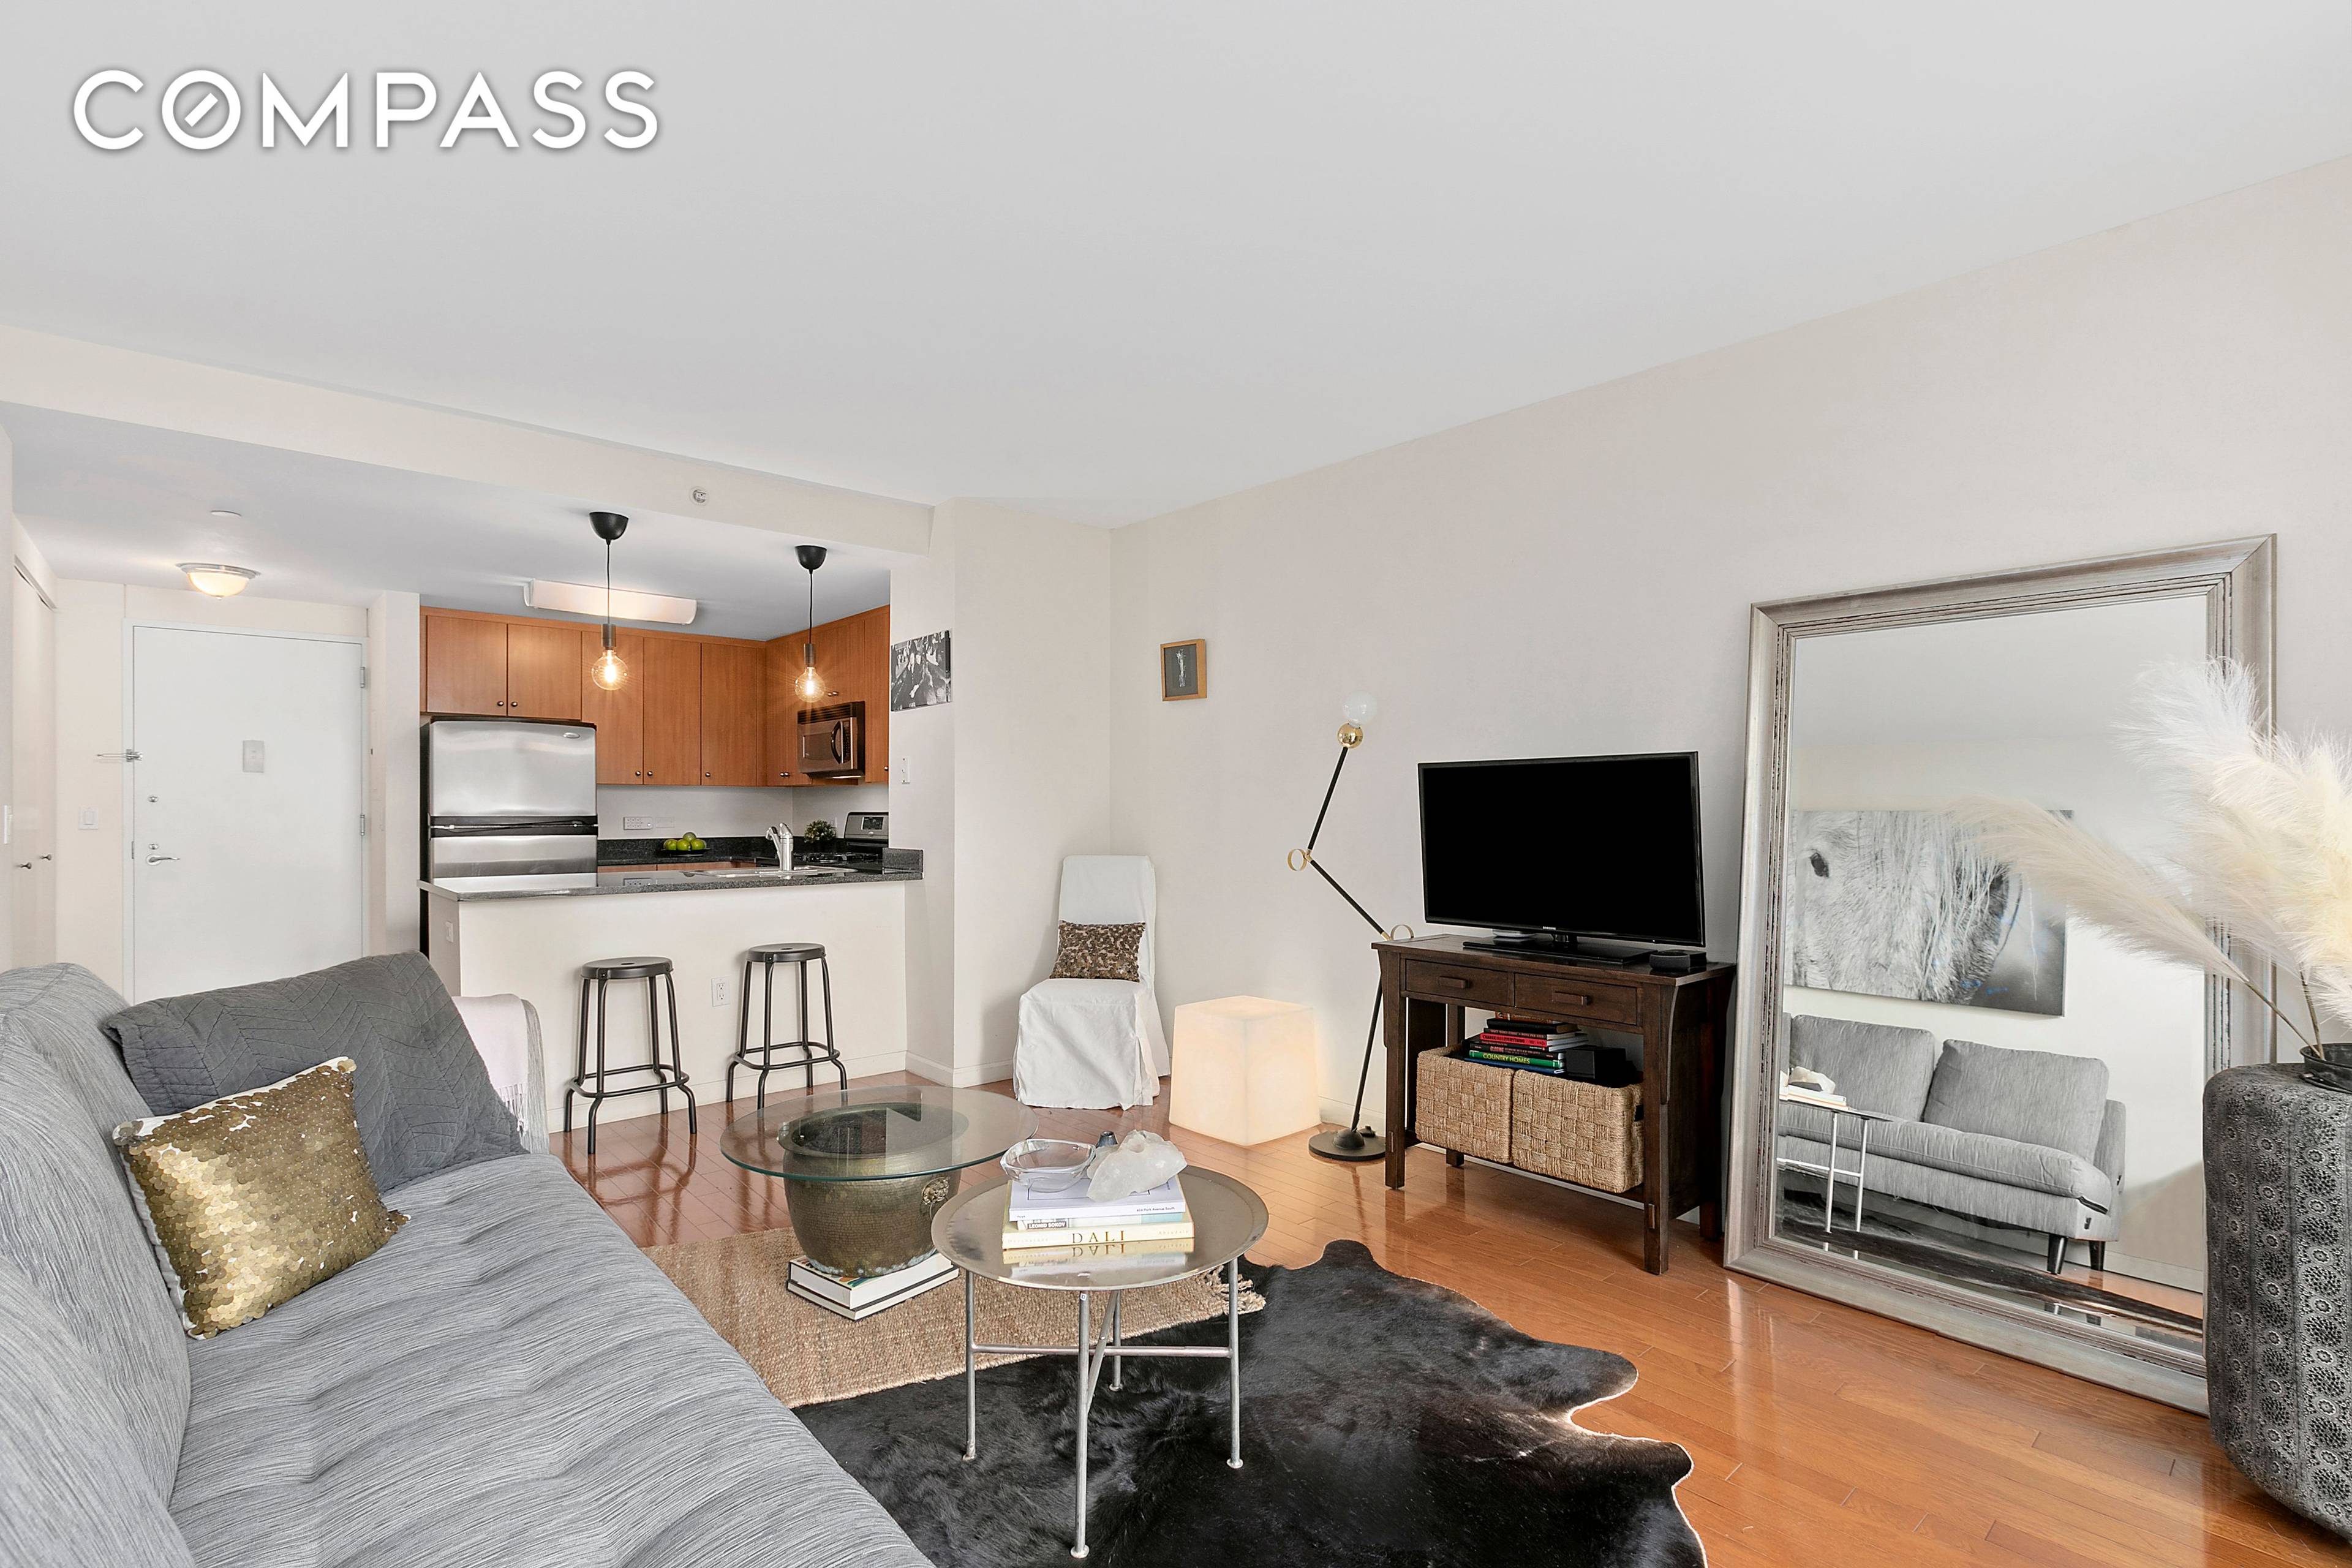 This unique North West facing 1 Bedroom home is featuring floor to ceiling windows, high end finishes, open modern kitchen with stainless steel appliances including a range, refrigerator, dishwasher, microwave, ...